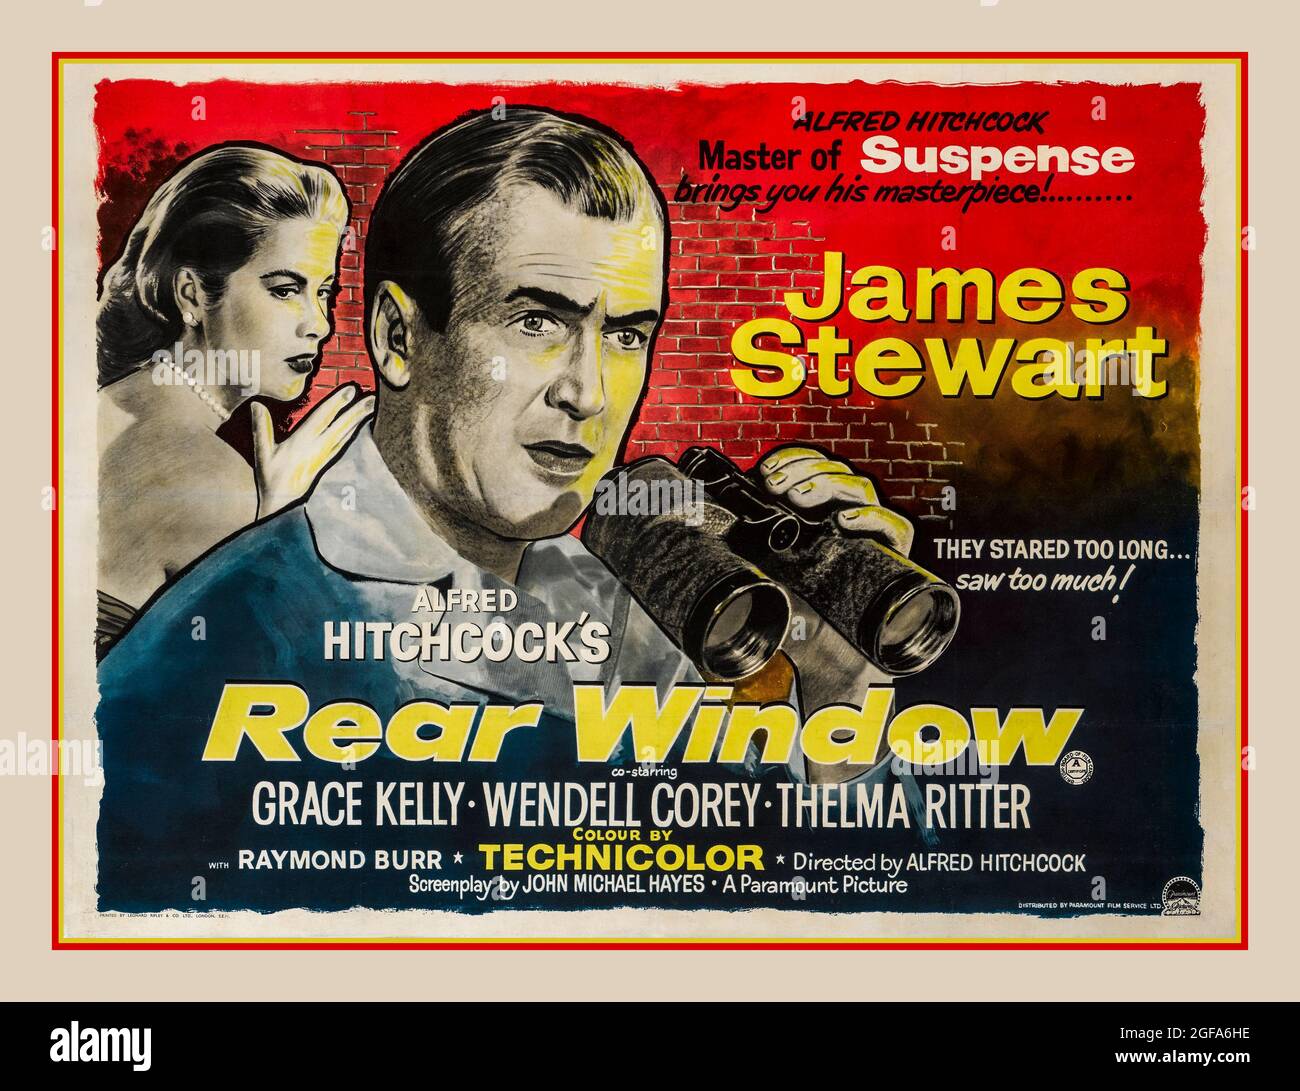 REAR WINDOW ALFRED HITCHCOCK 1954 Vintage Movie Film Poster ' Rear Window' directed by Alfred Hitchcock starring James Stewart, Grace Kelly, Wendell Corey, Thelma Ritter Raymond Burr, Rear Window is a 1954 American mystery thriller film written by John Michael Hayes based on Cornell Woolrich's 1942 short story 'It Had to Be Murder'. Originally released by Paramount Pictures, It was screened at the 1954 Venice Film Festival. Considered to be one of Director Hitchcocks finest films Stock Photo